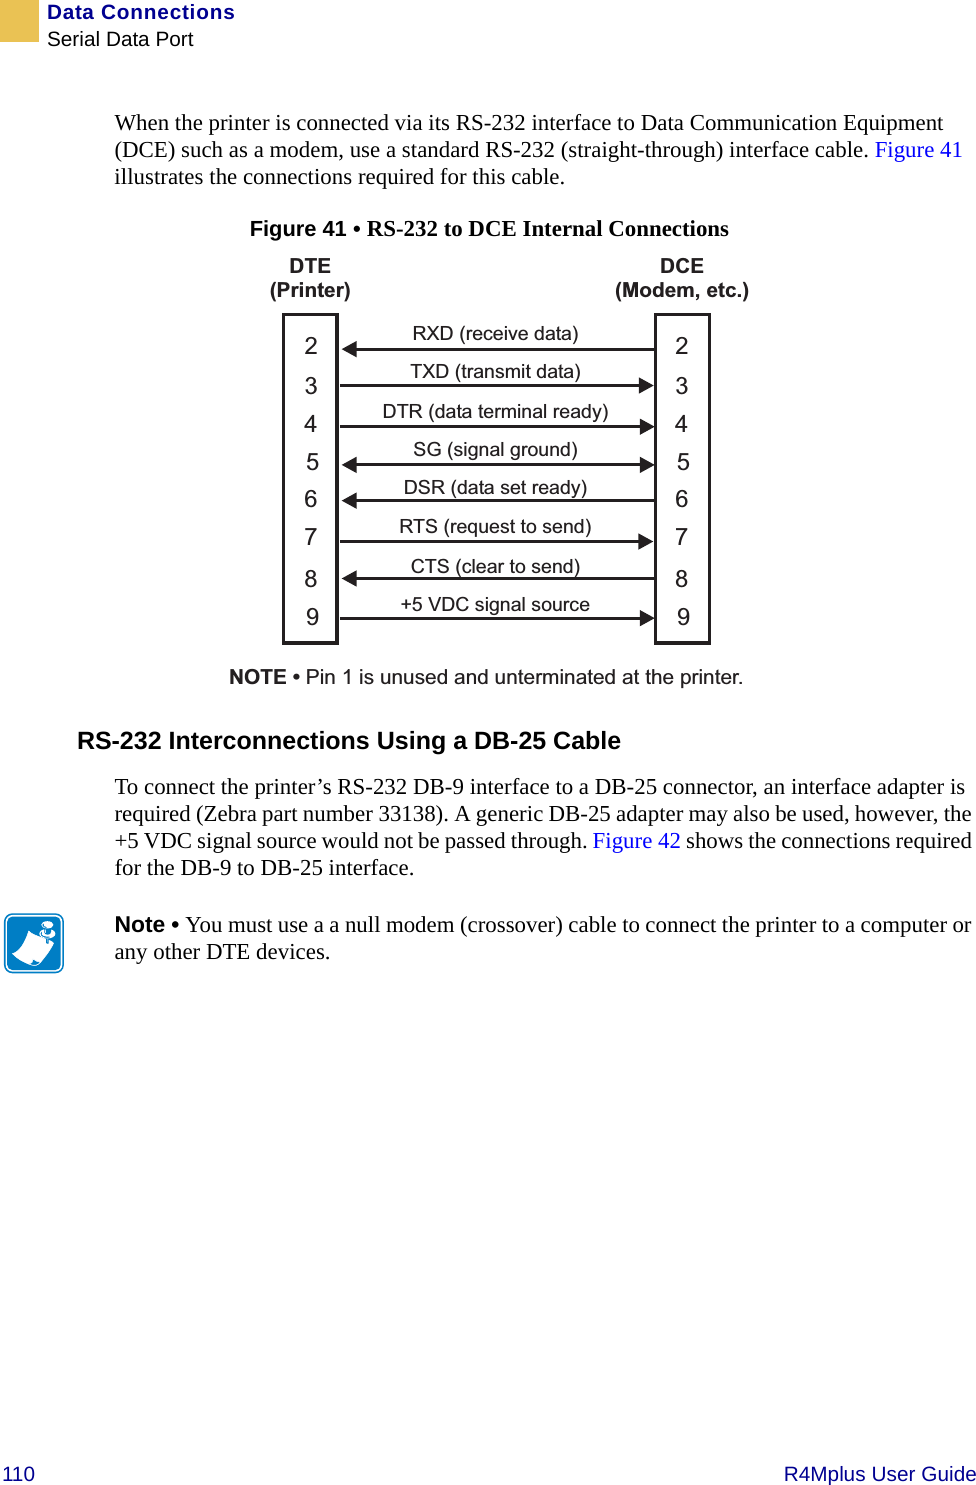 110   R4Mplus User GuideData ConnectionsSerial Data PortWhen the printer is connected via its RS-232 interface to Data Communication Equipment (DCE) such as a modem, use a standard RS-232 (straight-through) interface cable. Figure 41 illustrates the connections required for this cable.Figure 41 • RS-232 to DCE Internal ConnectionsRS-232 Interconnections Using a DB-25 CableTo connect the printer’s RS-232 DB-9 interface to a DB-25 connector, an interface adapter is required (Zebra part number 33138). A generic DB-25 adapter may also be used, however, the +5 VDC signal source would not be passed through. Figure 42 shows the connections required for the DB-9 to DB-25 interface. Note • You must use a a null modem (crossover) cable to connect the printer to a computer or any other DTE devices.DTE(Printer)DCE(Modem, etc.)RXD (receive data)TXD (transmit data)DTR (data terminal ready)SG (signal ground)DSR (data set ready)RTS (request to send)CTS (clear to send)+5 VDC signal sourceNOTE • Pin 1 is unused and unterminated at the printer.2345678923456789